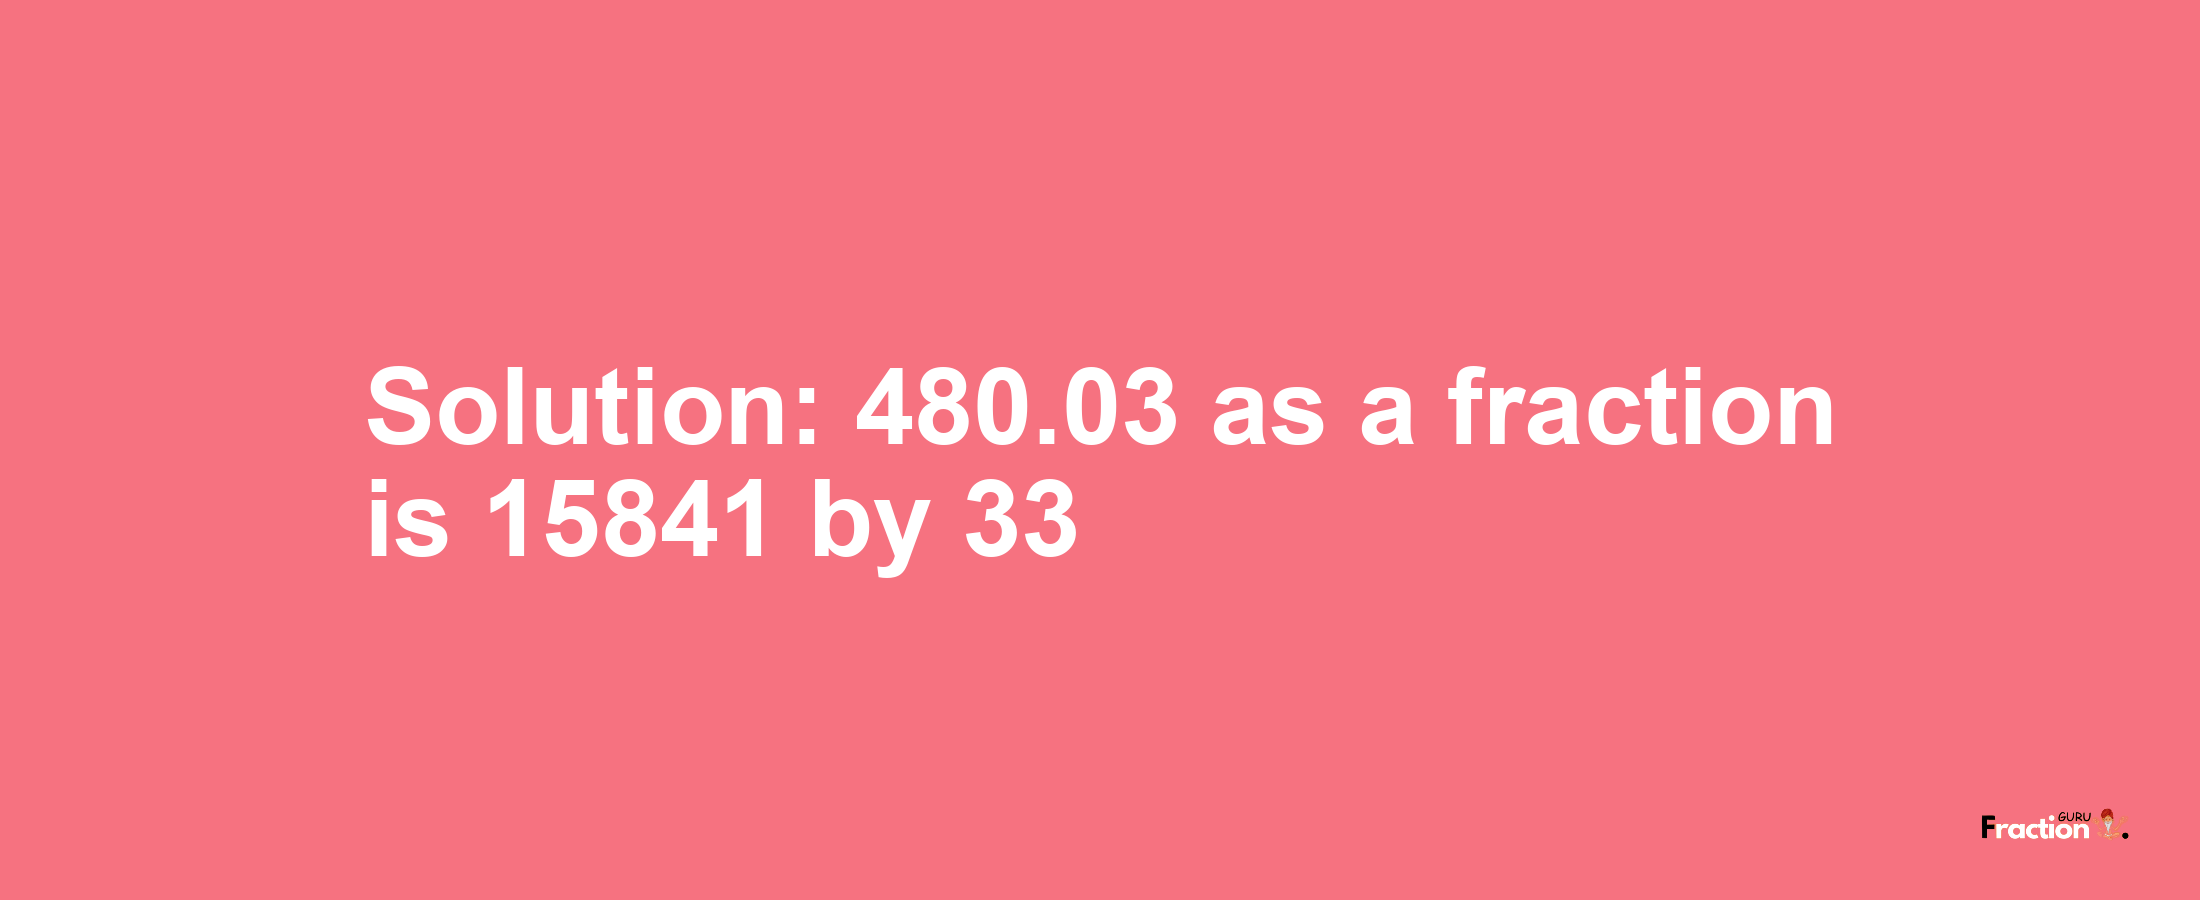 Solution:480.03 as a fraction is 15841/33